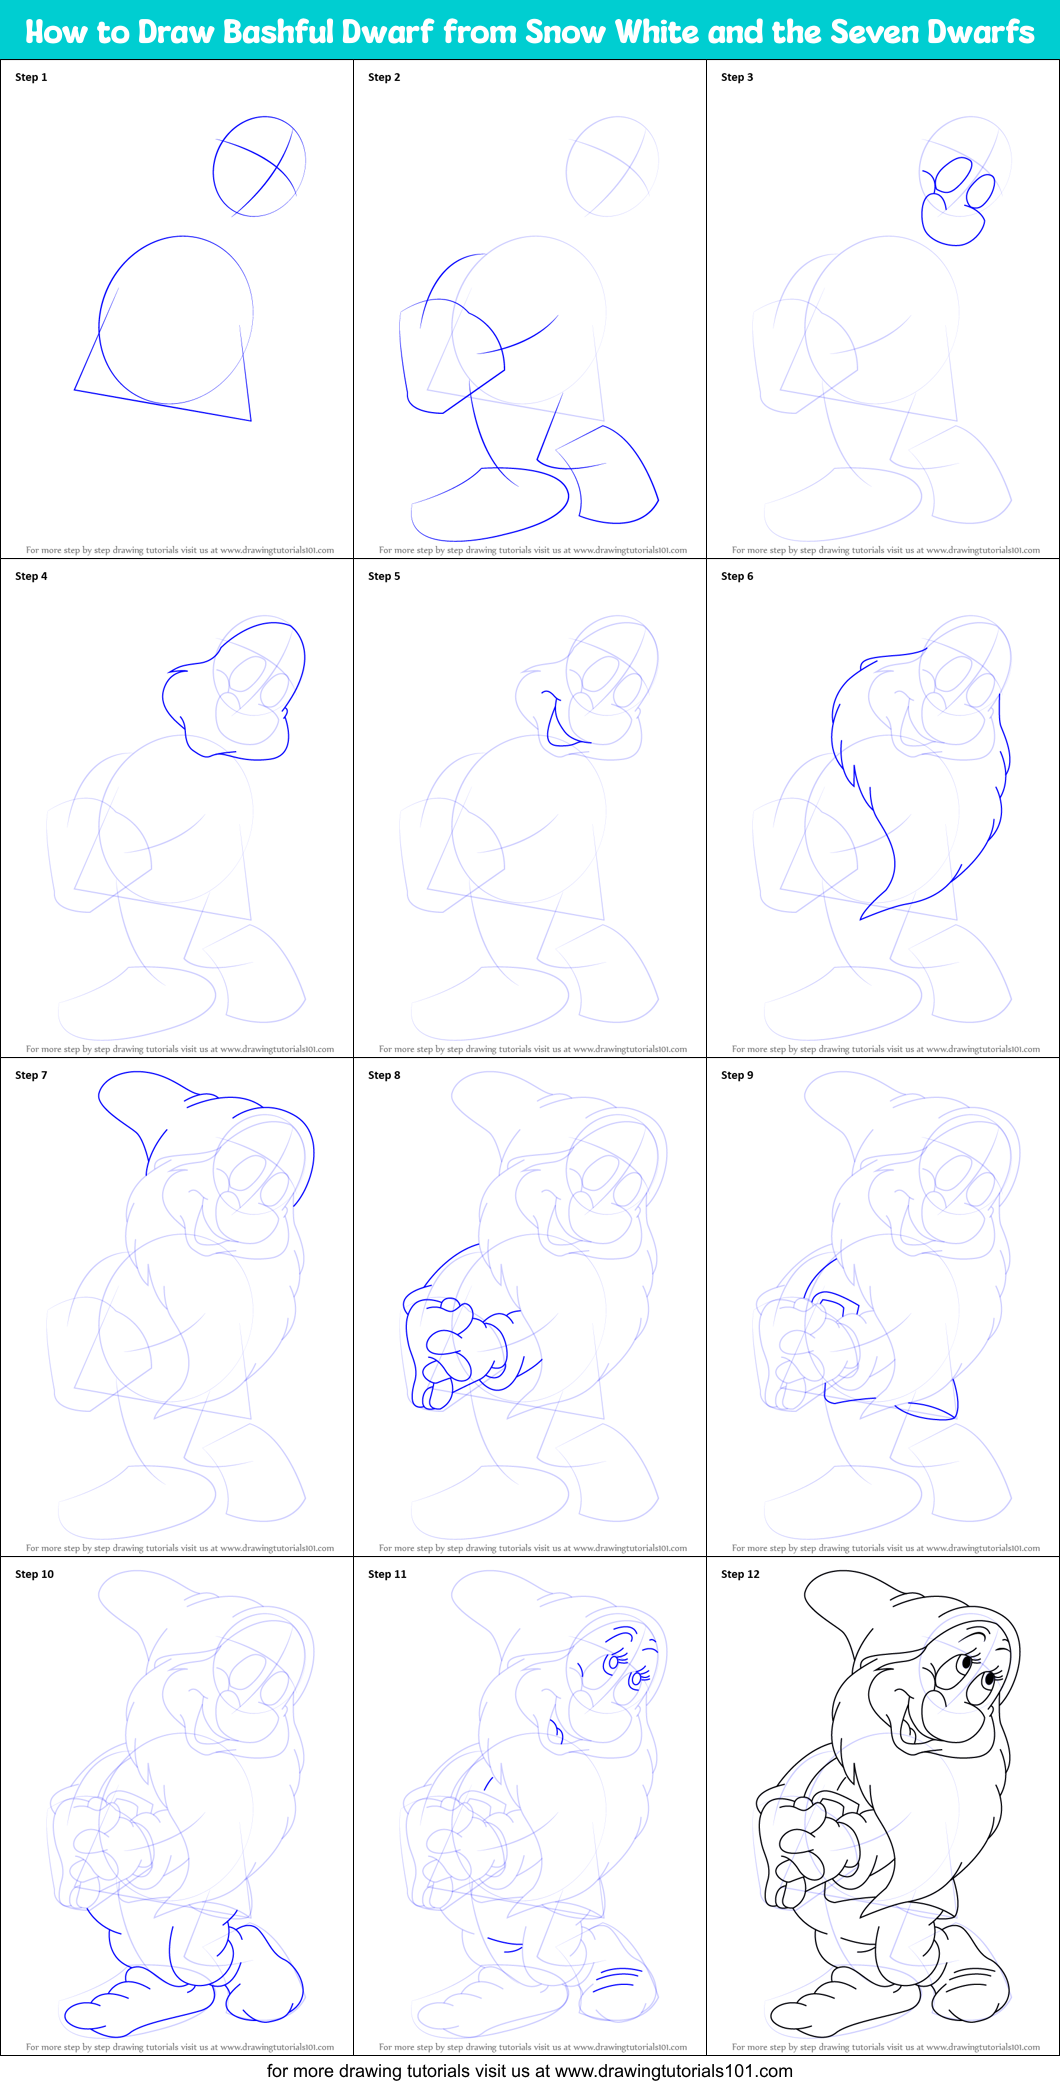 How To Draw Bashful Dwarf From Snow White And The Seven Dwarfs Printable Step By Step Drawing 